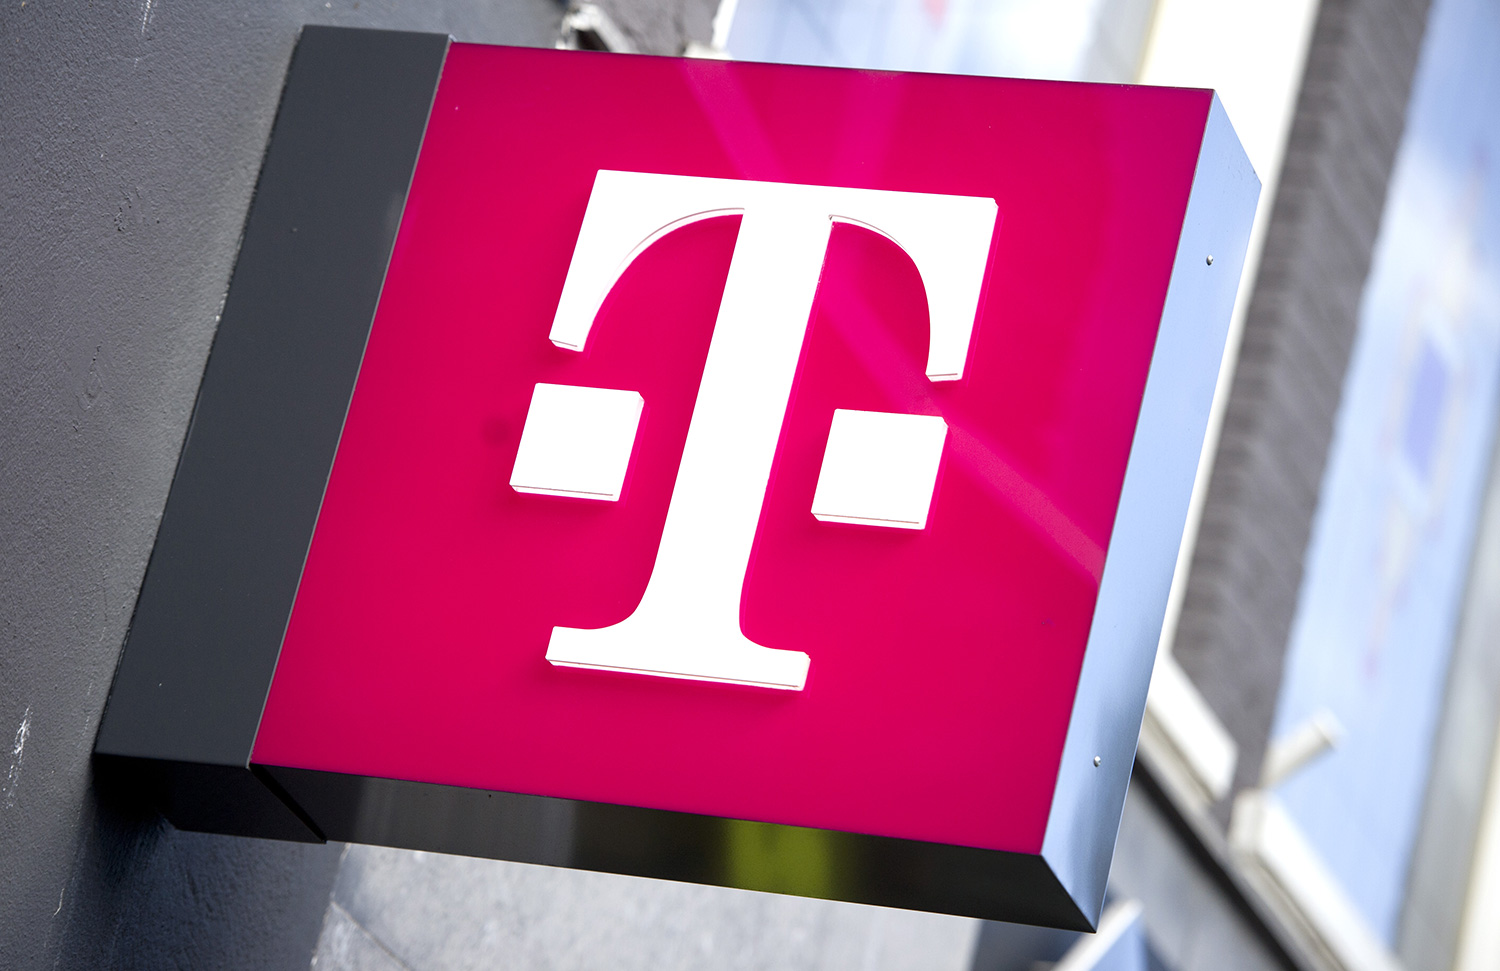 TMobile Black Friday 2019 deals unveiled early, ahead of Friday launch